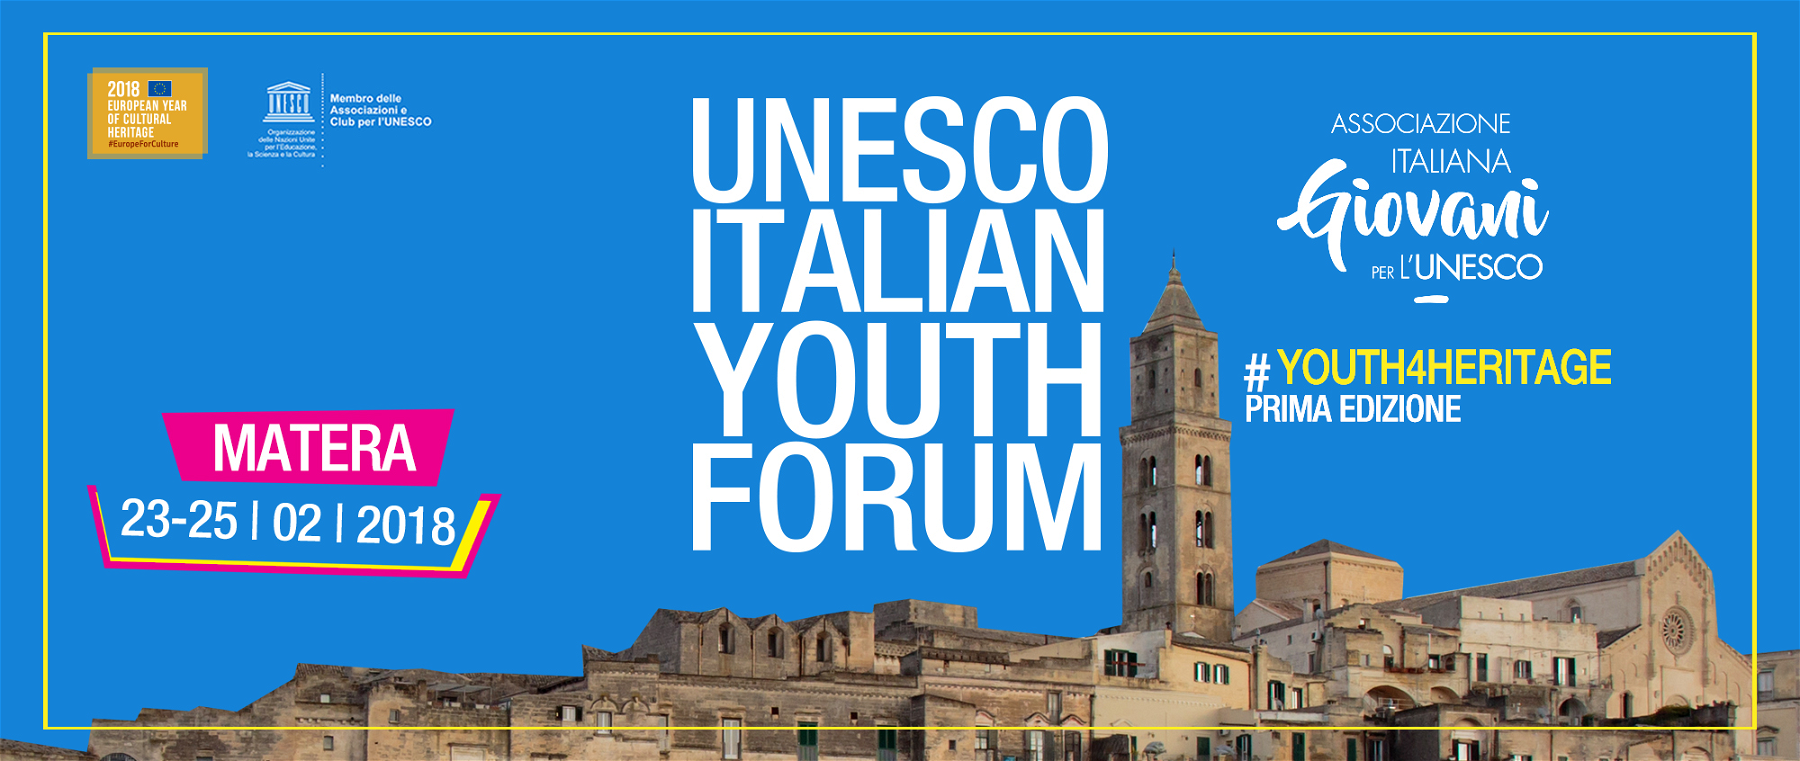 Matera hosts the first UNESCO youth forum, Feb. 23-25. Here's how to participate